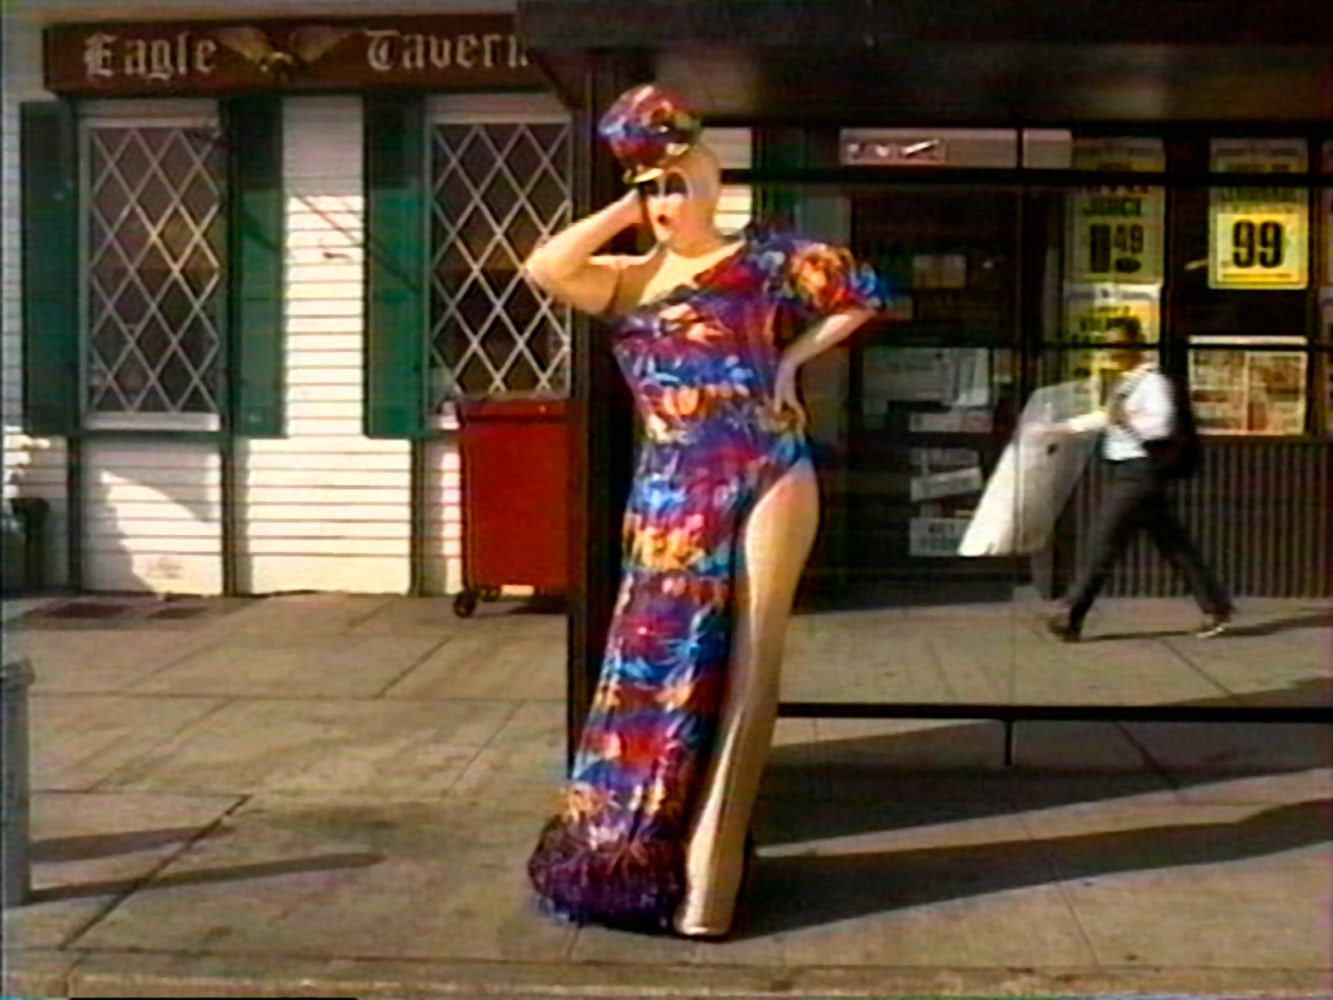 Charles Atlas
Mrs. Peanut Visits New York, 1992-1999
Video, sound
Duration: 6 minutes, 8 seconds